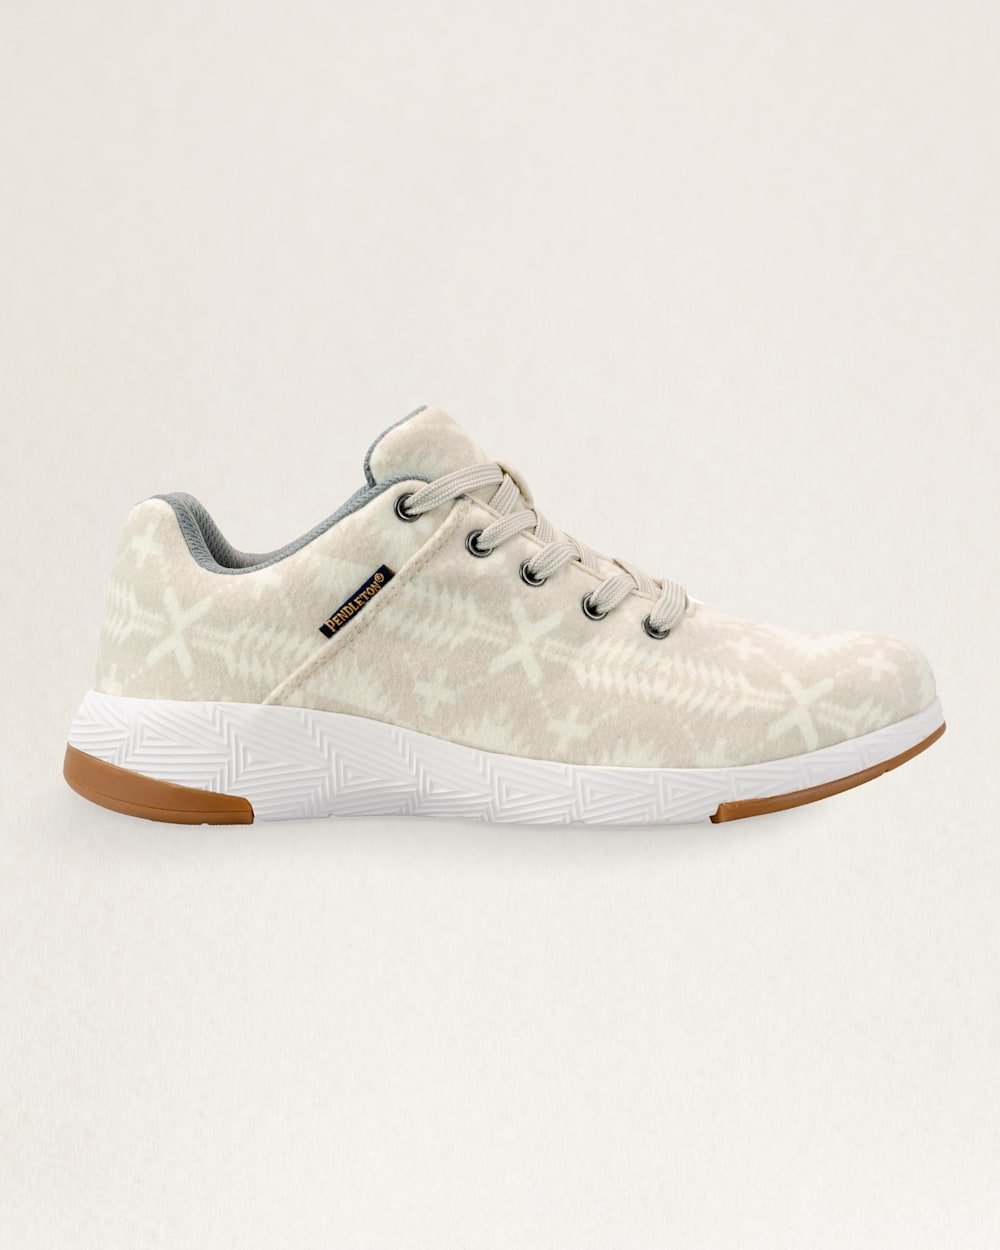 ALTERNATE VIEW OF WOMEN'S WOOL SNEAKERS IN OFF WHITE SPIDER ROCK image number 3